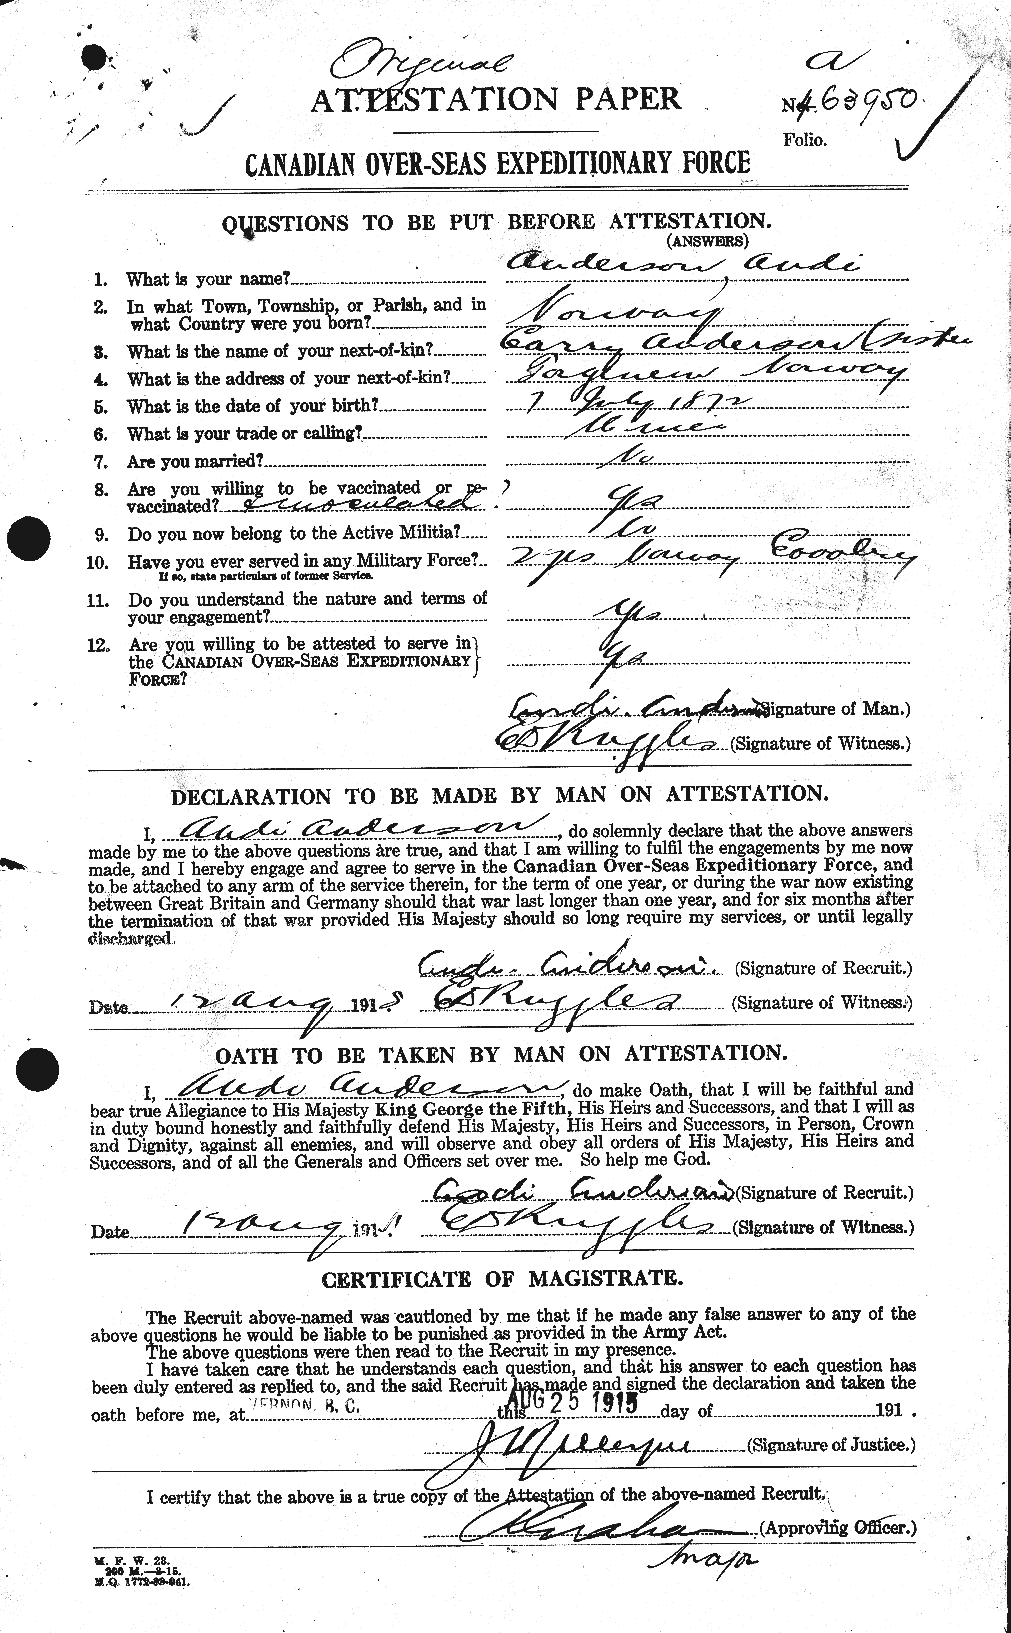 Personnel Records of the First World War - CEF 209334a